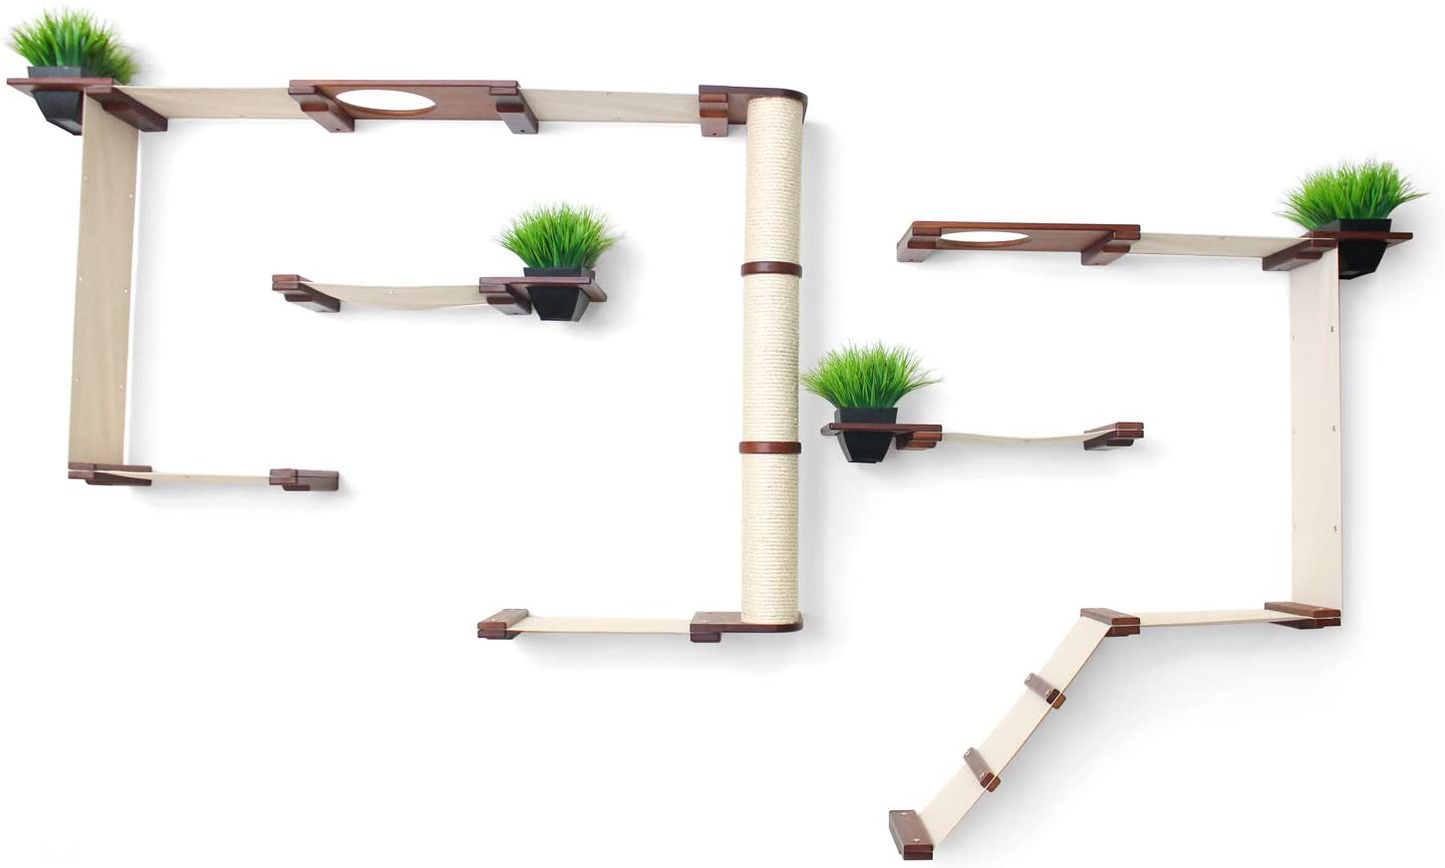 Catastrophicreations Gardens Set for Cats Multiple-Level Wall Mounted Scratch, Hammock Lounge, Play & Climbing Activity Center Furniture Cat Tree Shelves Animals & Pet Supplies > Pet Supplies > Cat Supplies > Cat Furniture CatastrophiCreations English Chestnut Bamboo/Natural Canvas Wood Finish/Canvas 